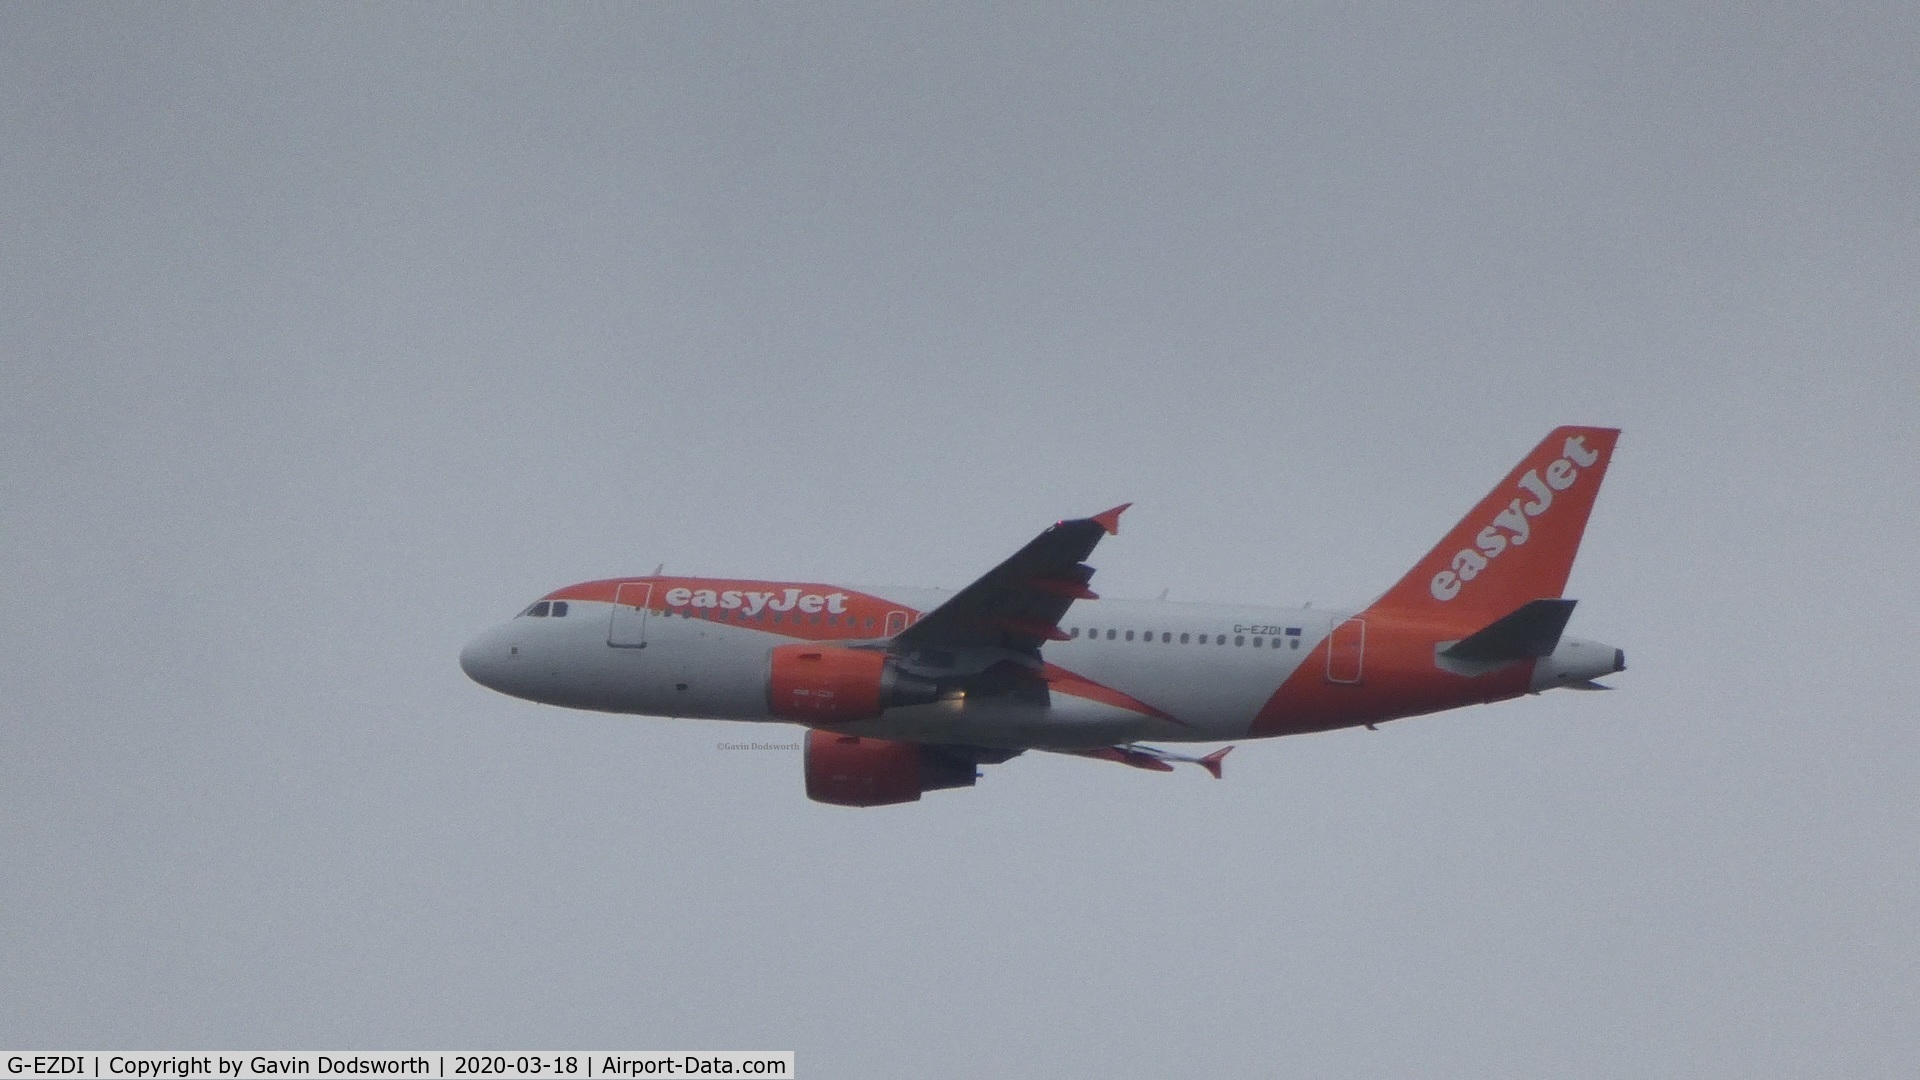 G-EZDI, 2008 Airbus A319-111 C/N 3537, Over Darlington, England, whilst on crew training at Teesside airport on 18/03/20